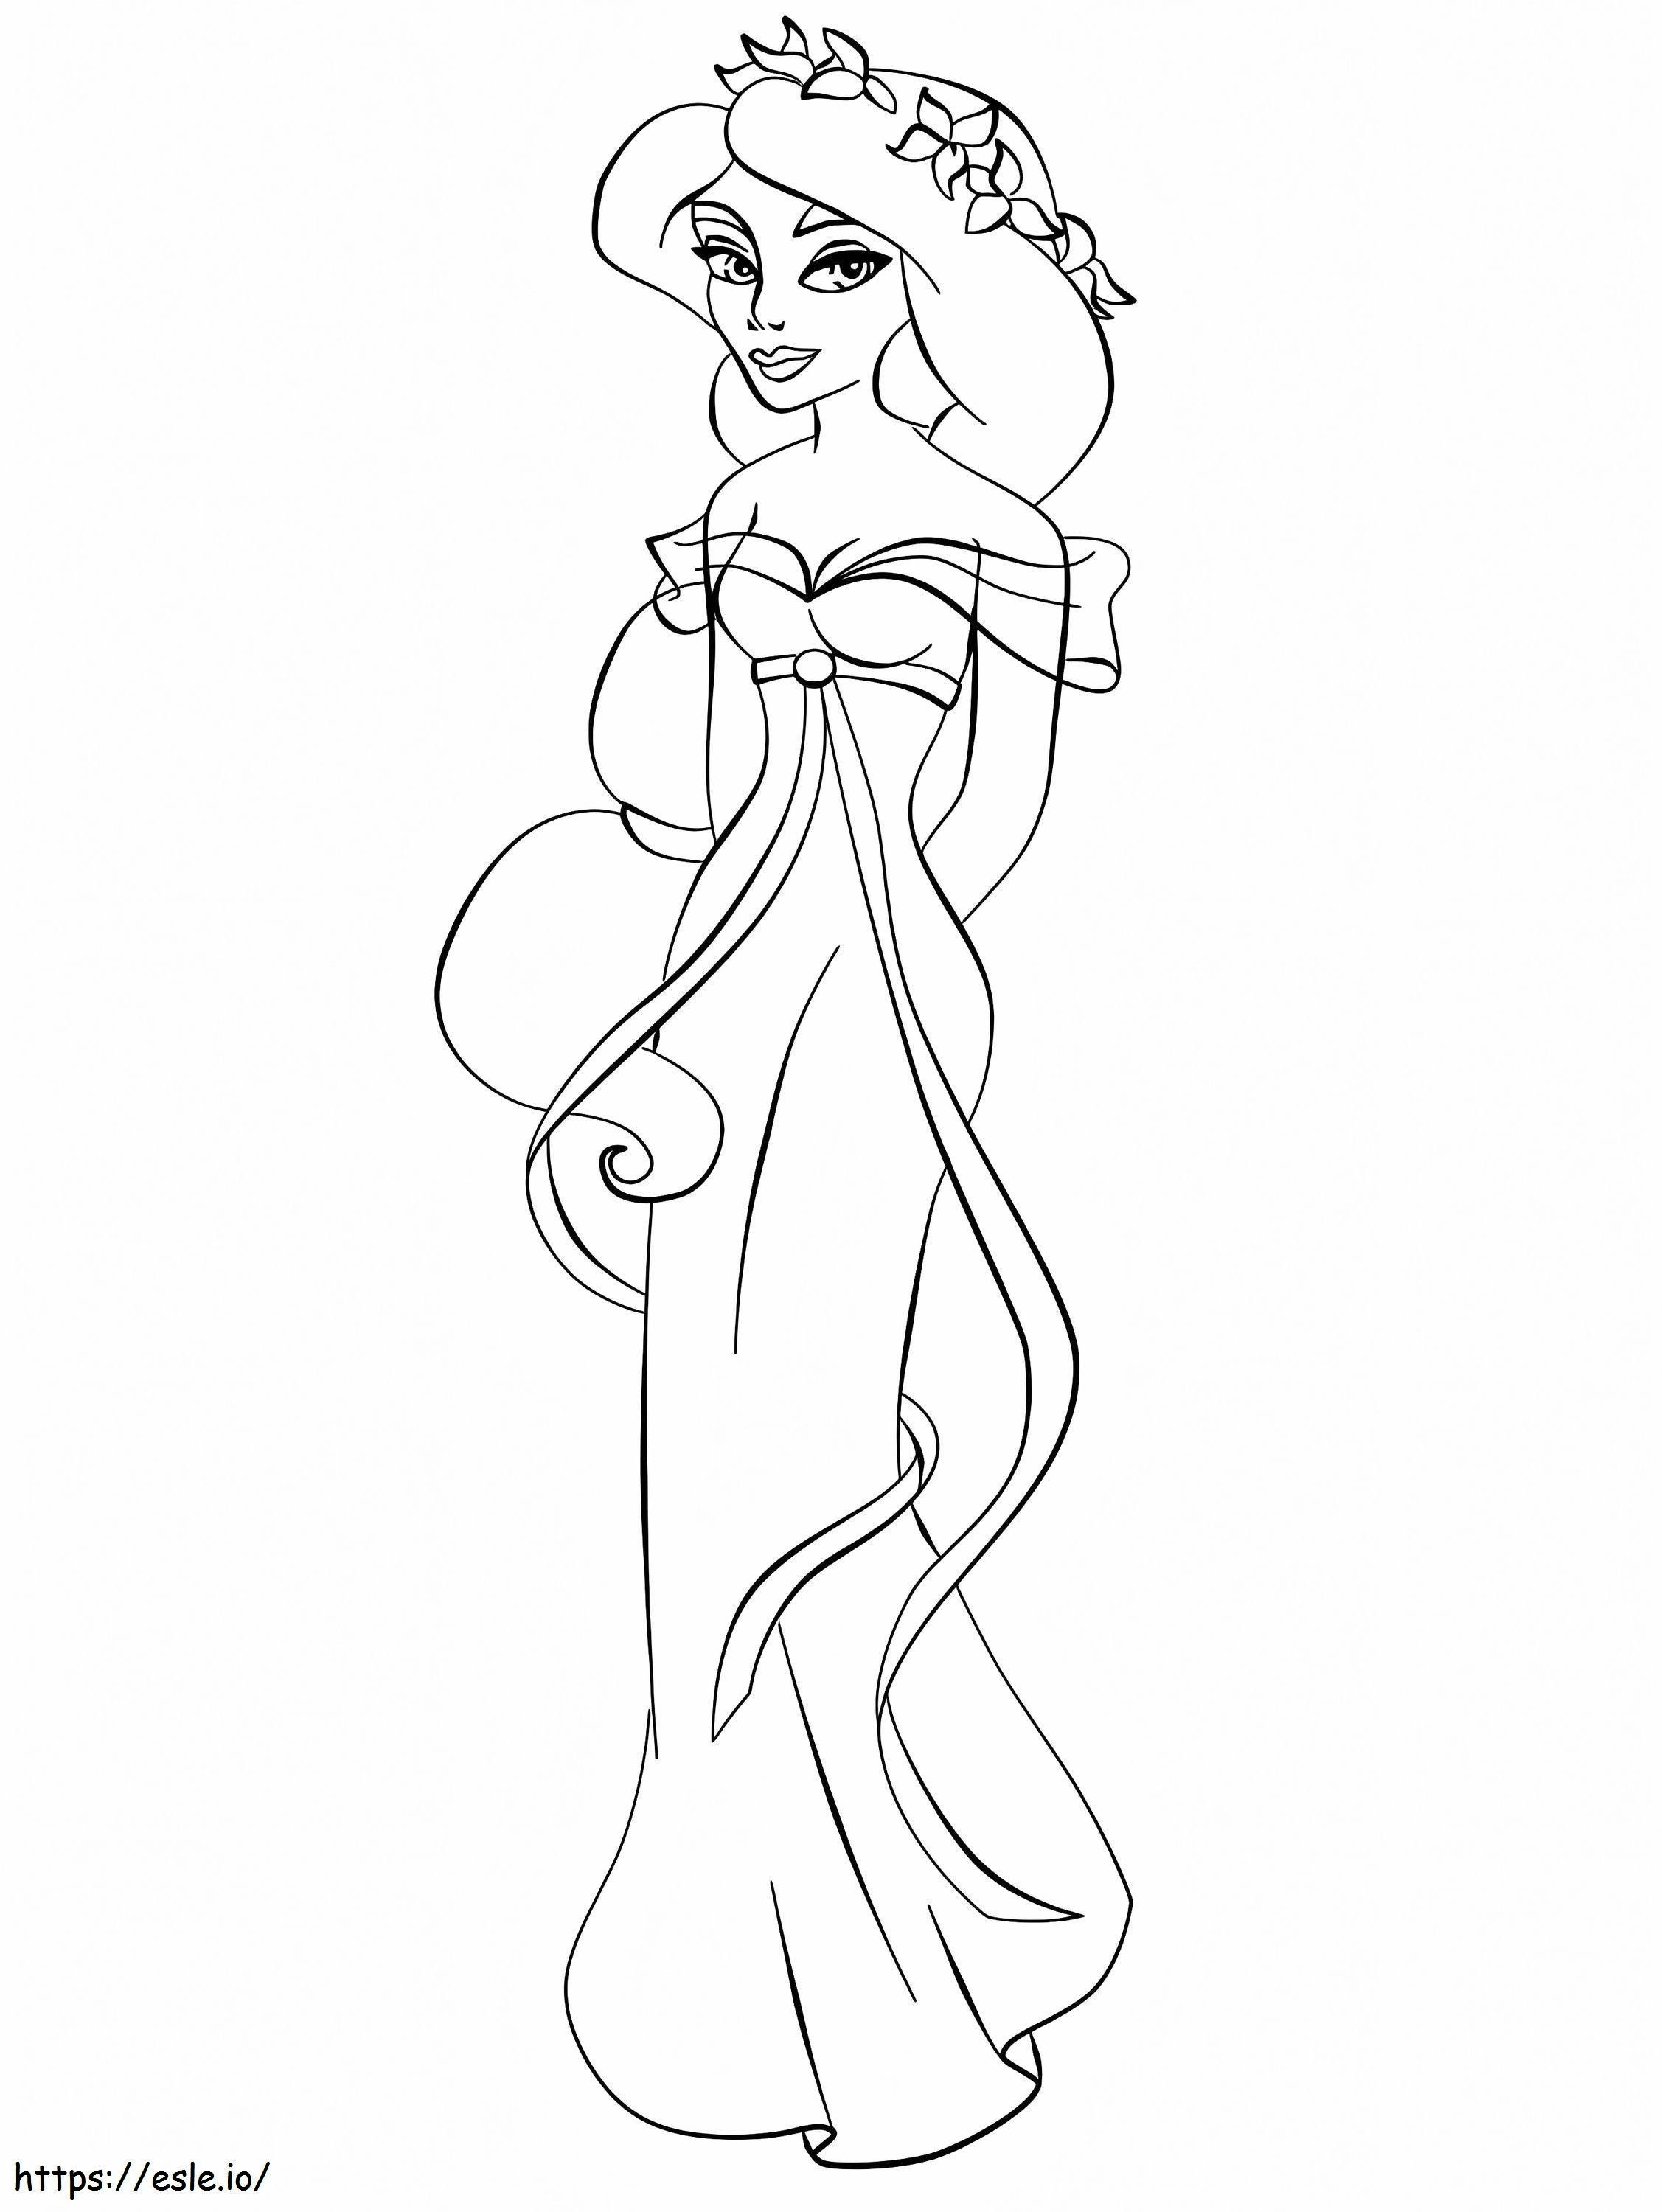 Hermosa Giselle coloring page